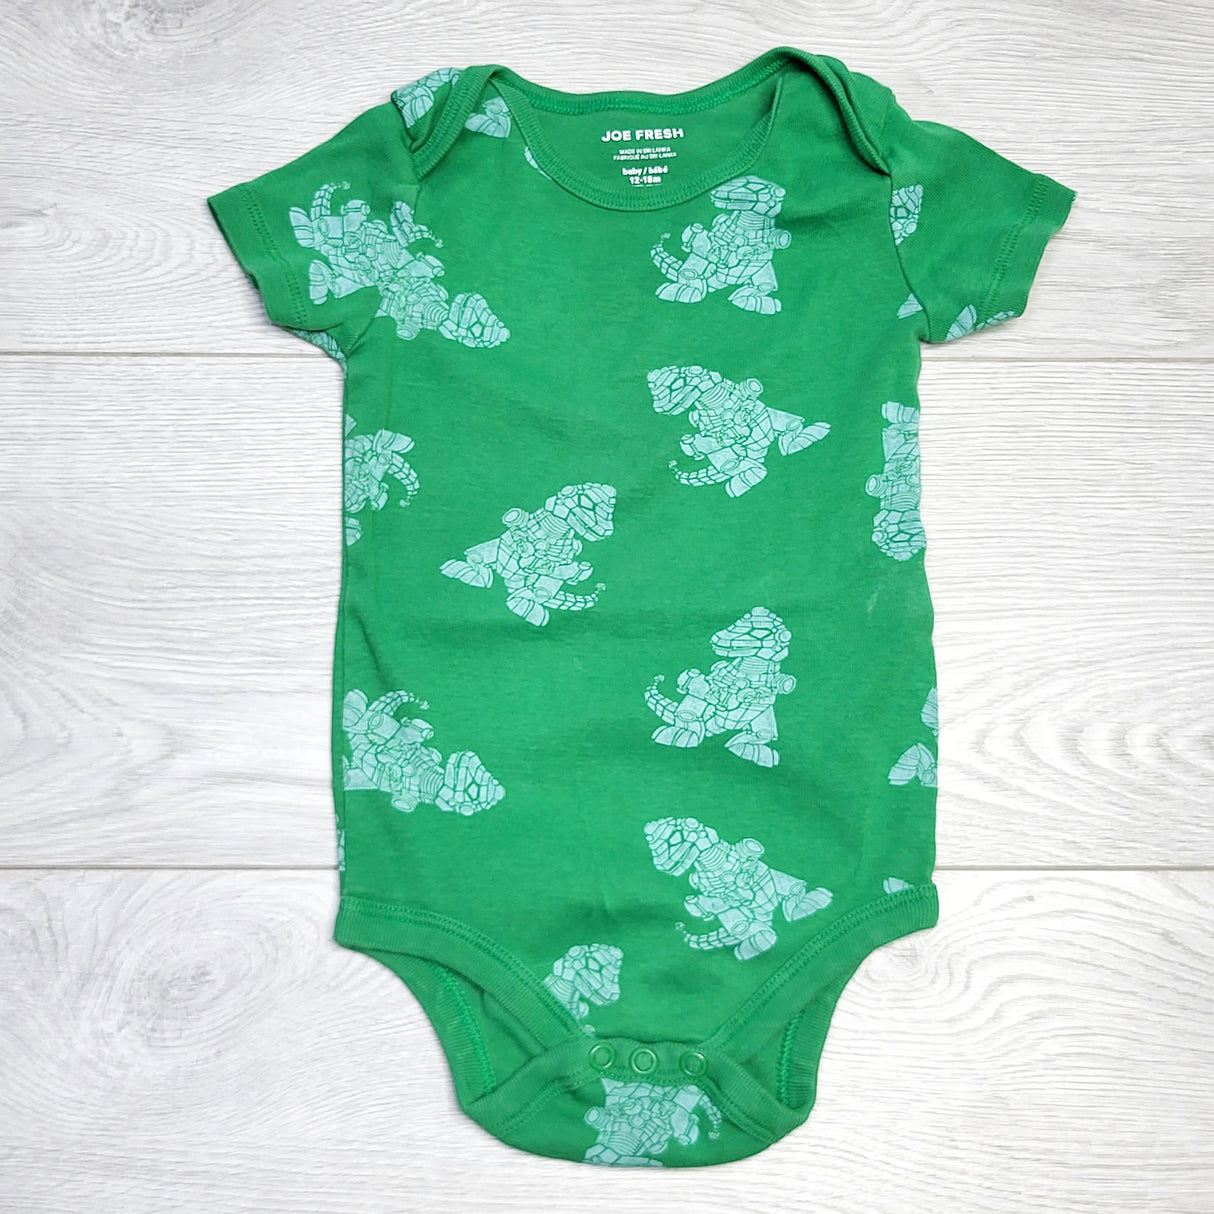 RZA2 - Joe green onesie with robotic dinosaurs. Size 12-18 months